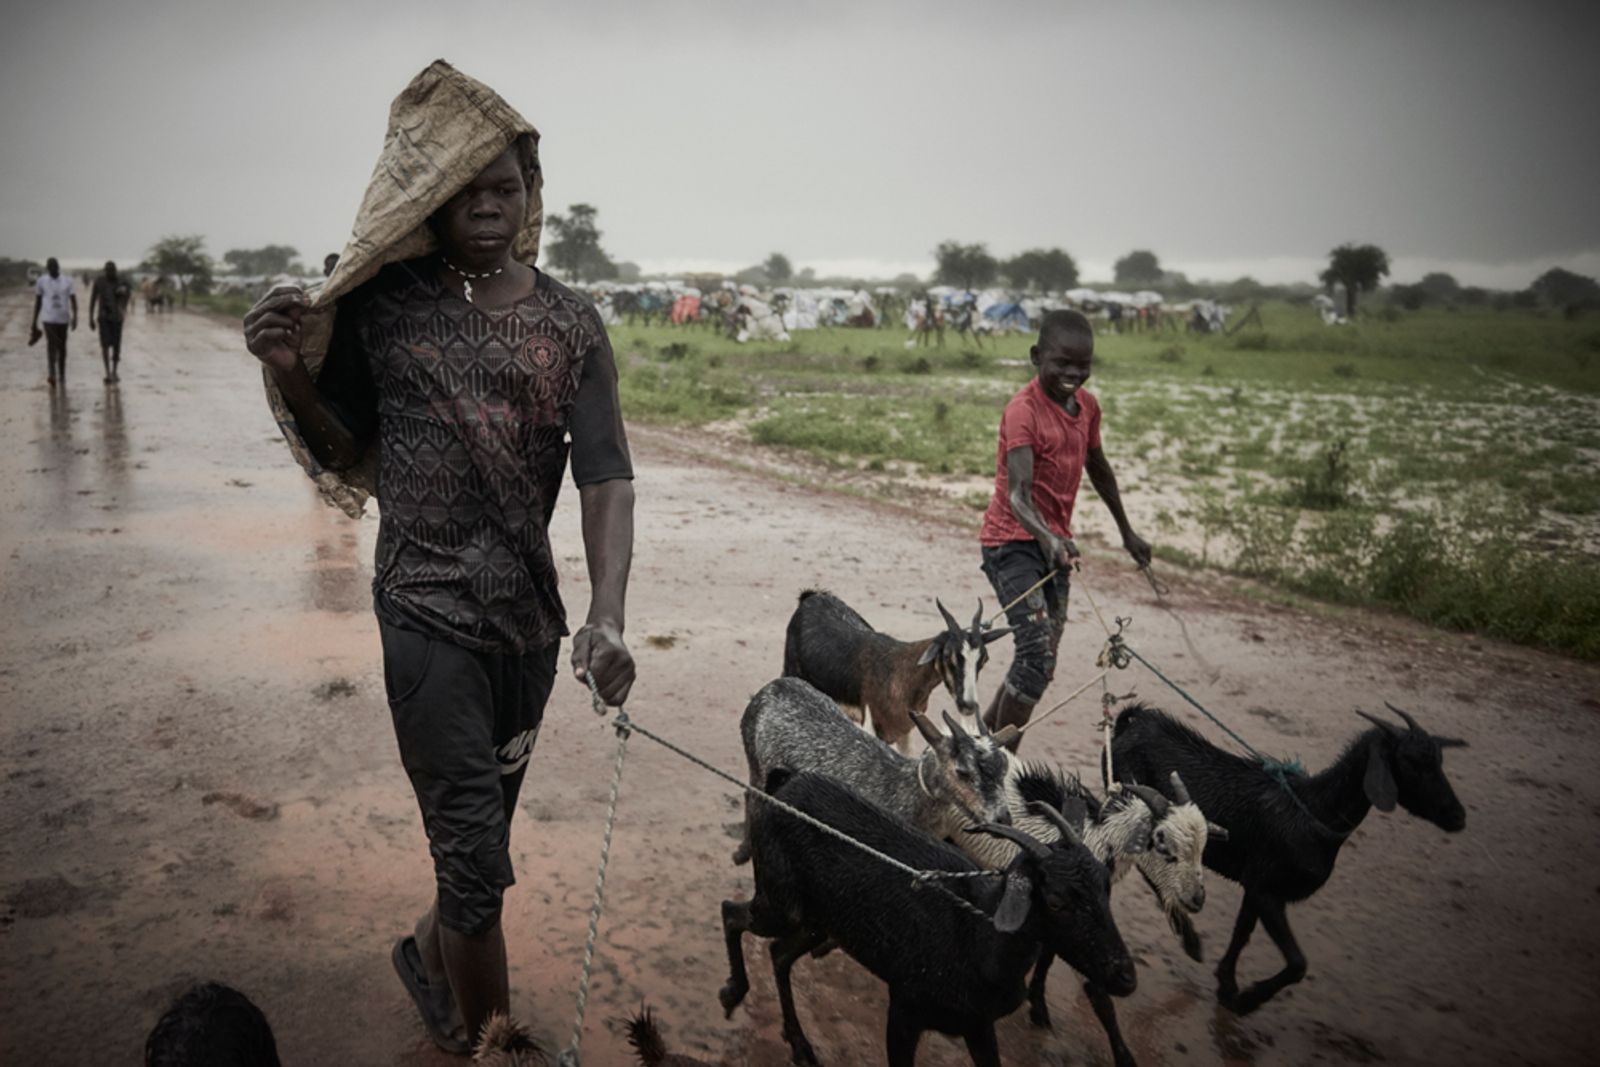 © Christina Simons - Goat herders from the IDP camp in Abyei walk home in the evening rainstorm. 26/08/2022 Abyei, South Sudan.